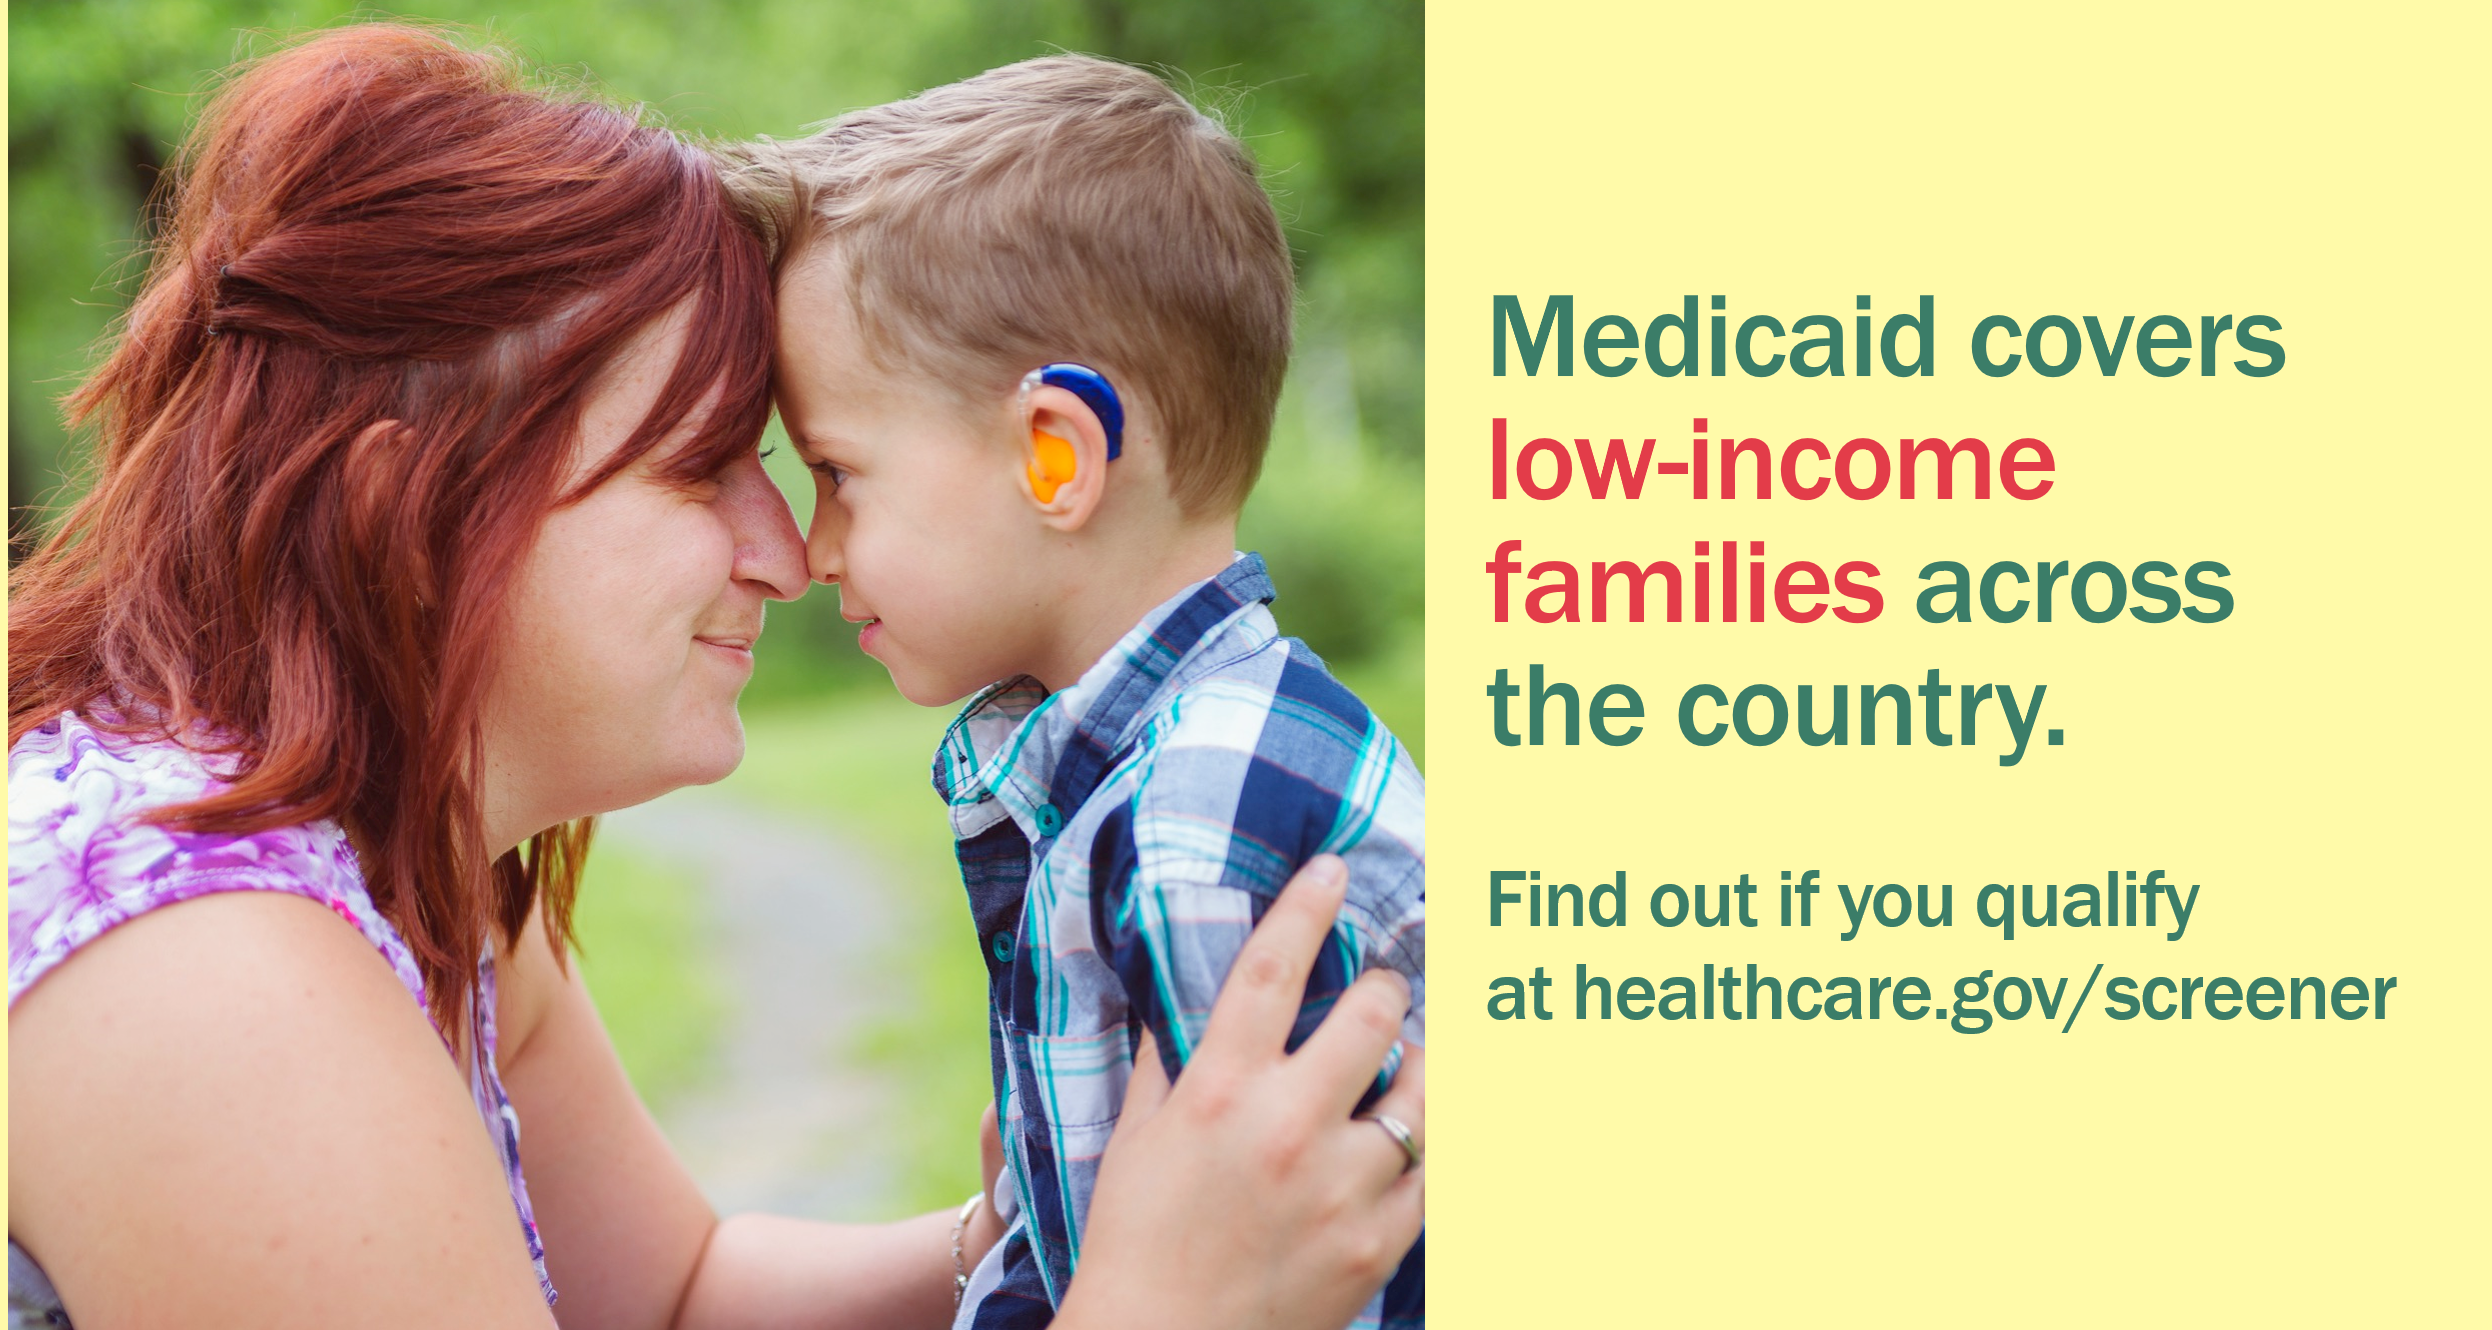 Image of a mother and young son with a hearing aid and the message “Medicaid covers low income families across the country. Find out if you qualify at healthcare.gov/screener.”